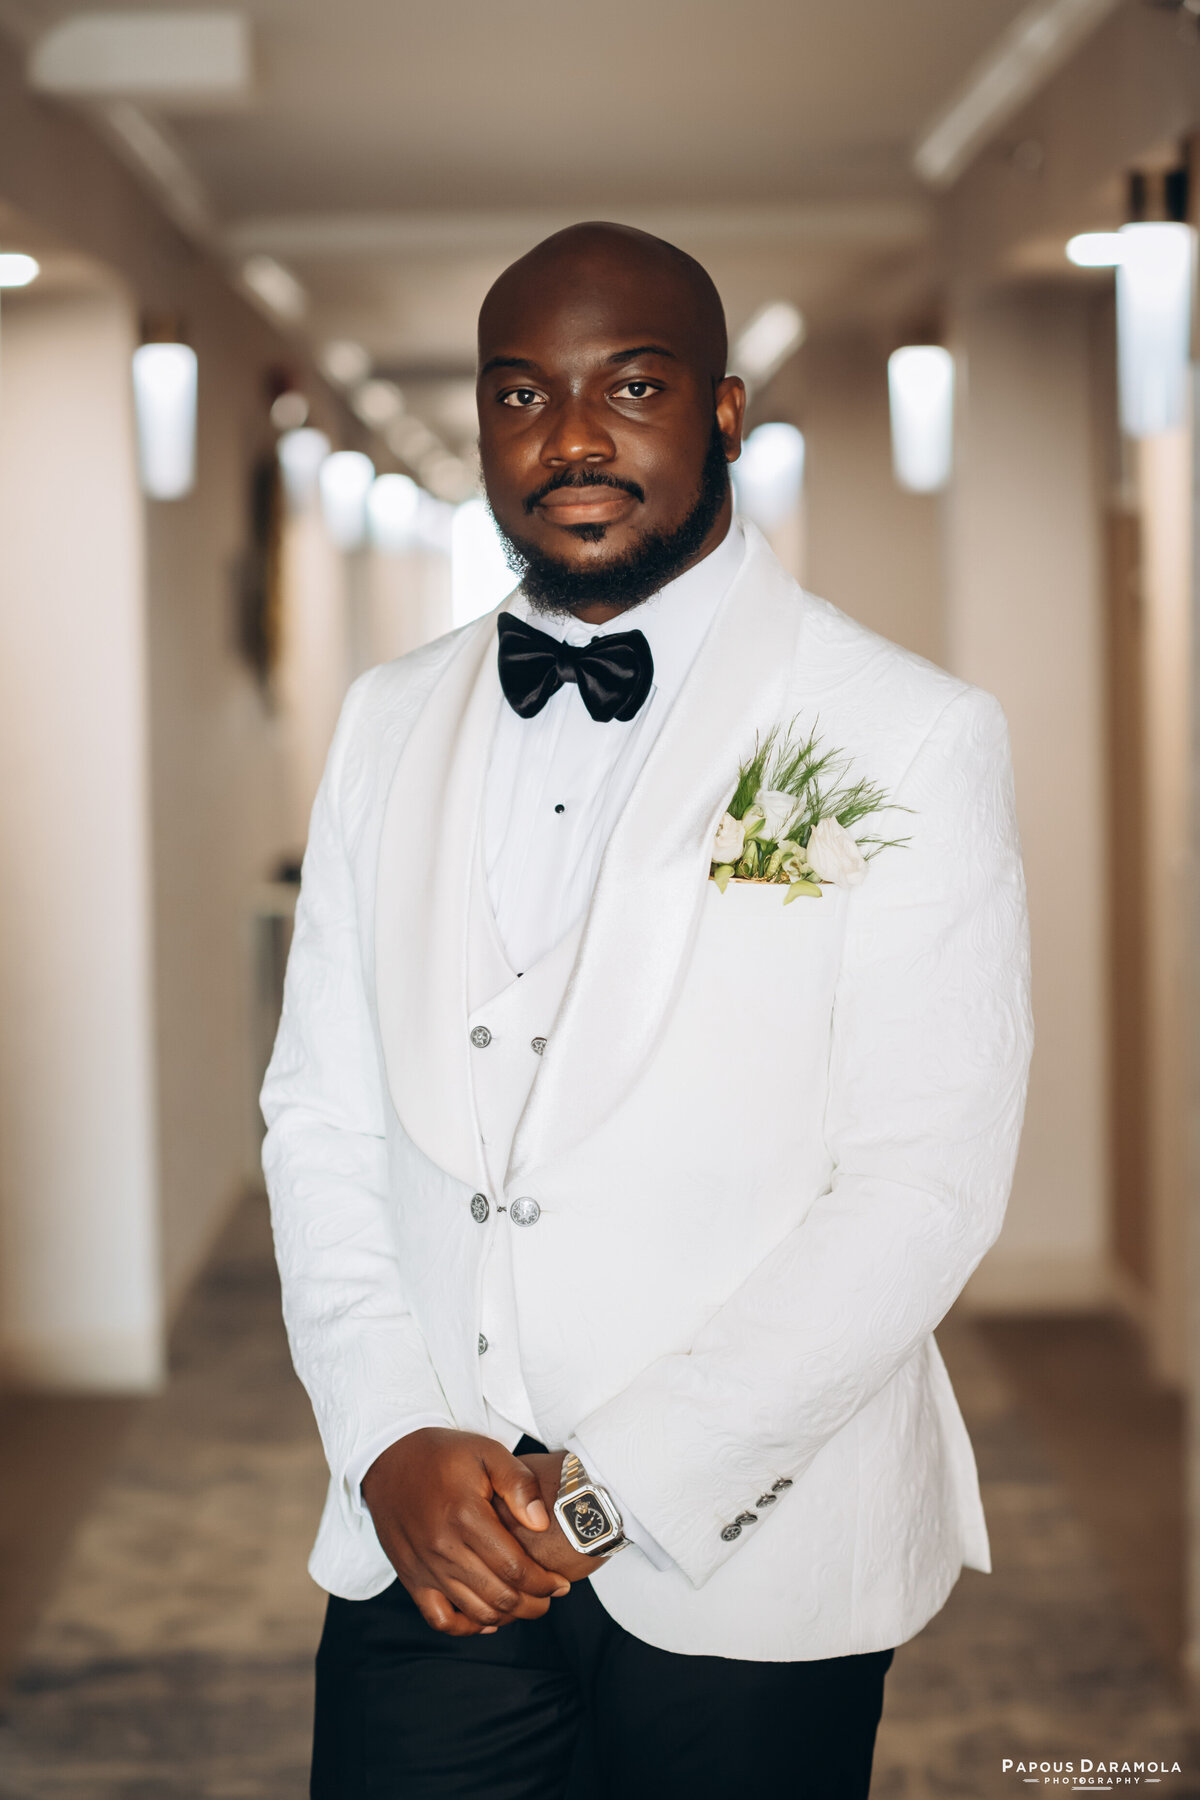 Abigail and Abije Oruka Events Papouse photographer Wedding event planners Toronto planner African Nigerian Eyitayo Dada Dara Ayoola outdoor ceremony floral princess ballgown rolls royce groom suit potraits  paradise banquet hall vaughn 3